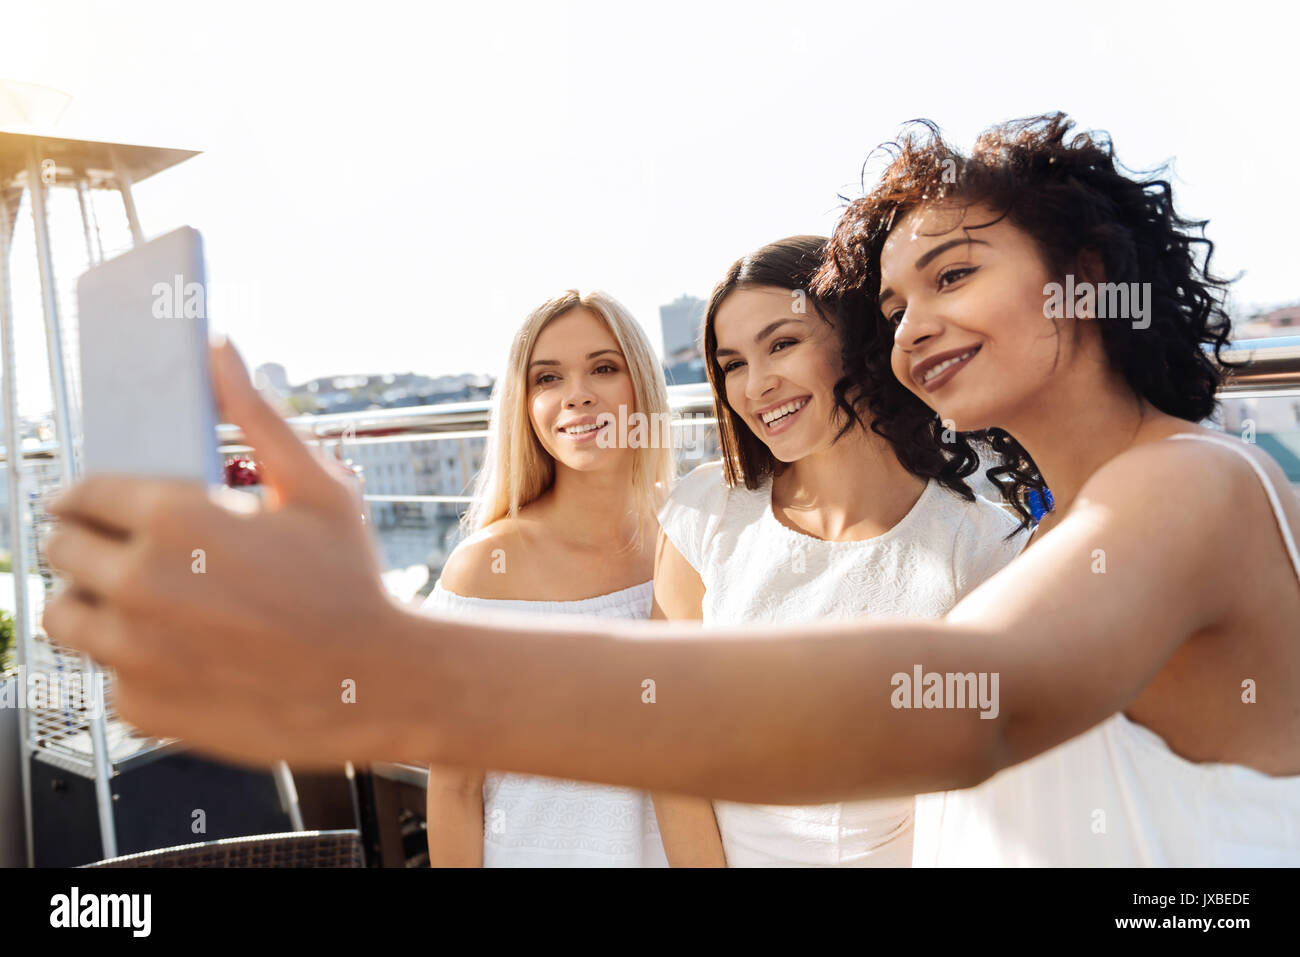 Pleasant brunette woman holding a smartphone Stock Photo